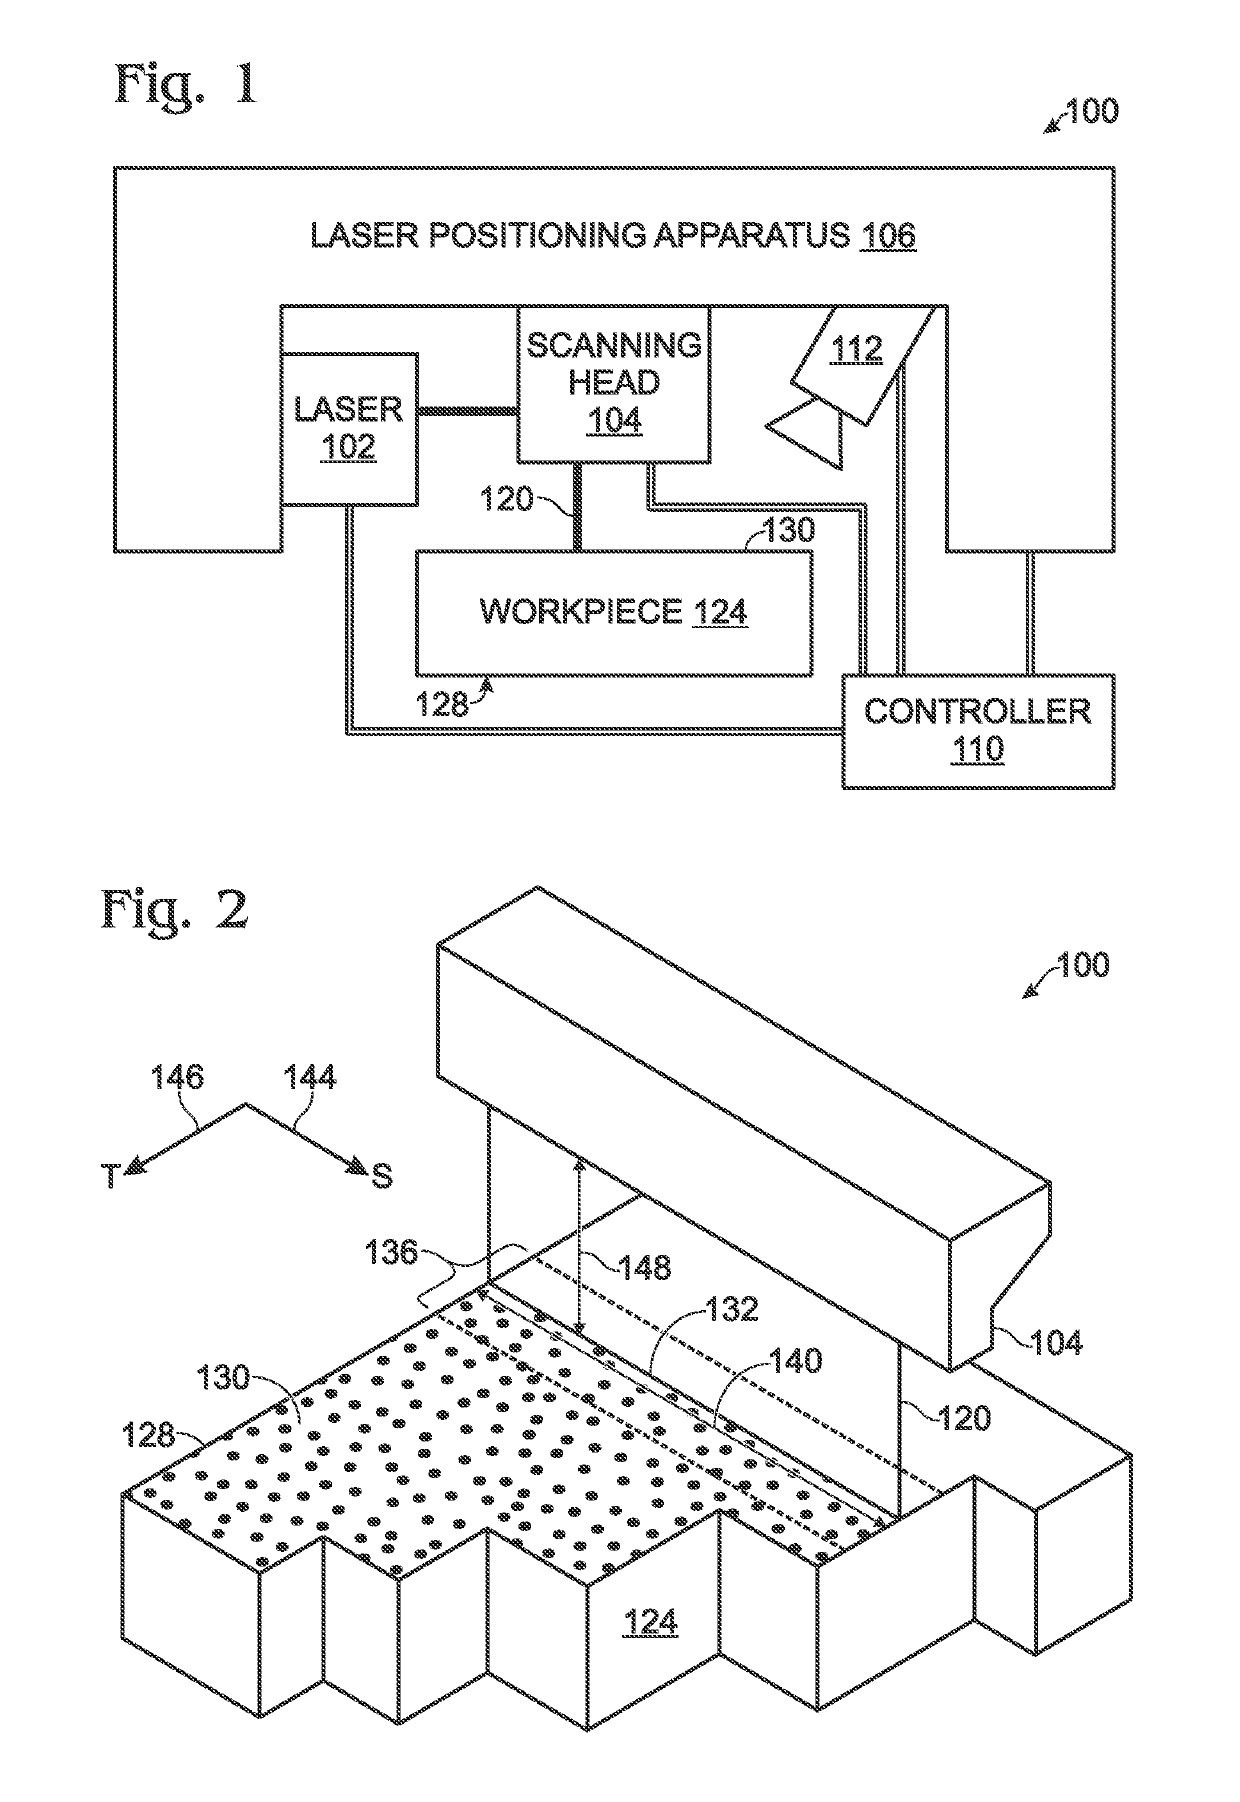 Large-area selective ablation methods